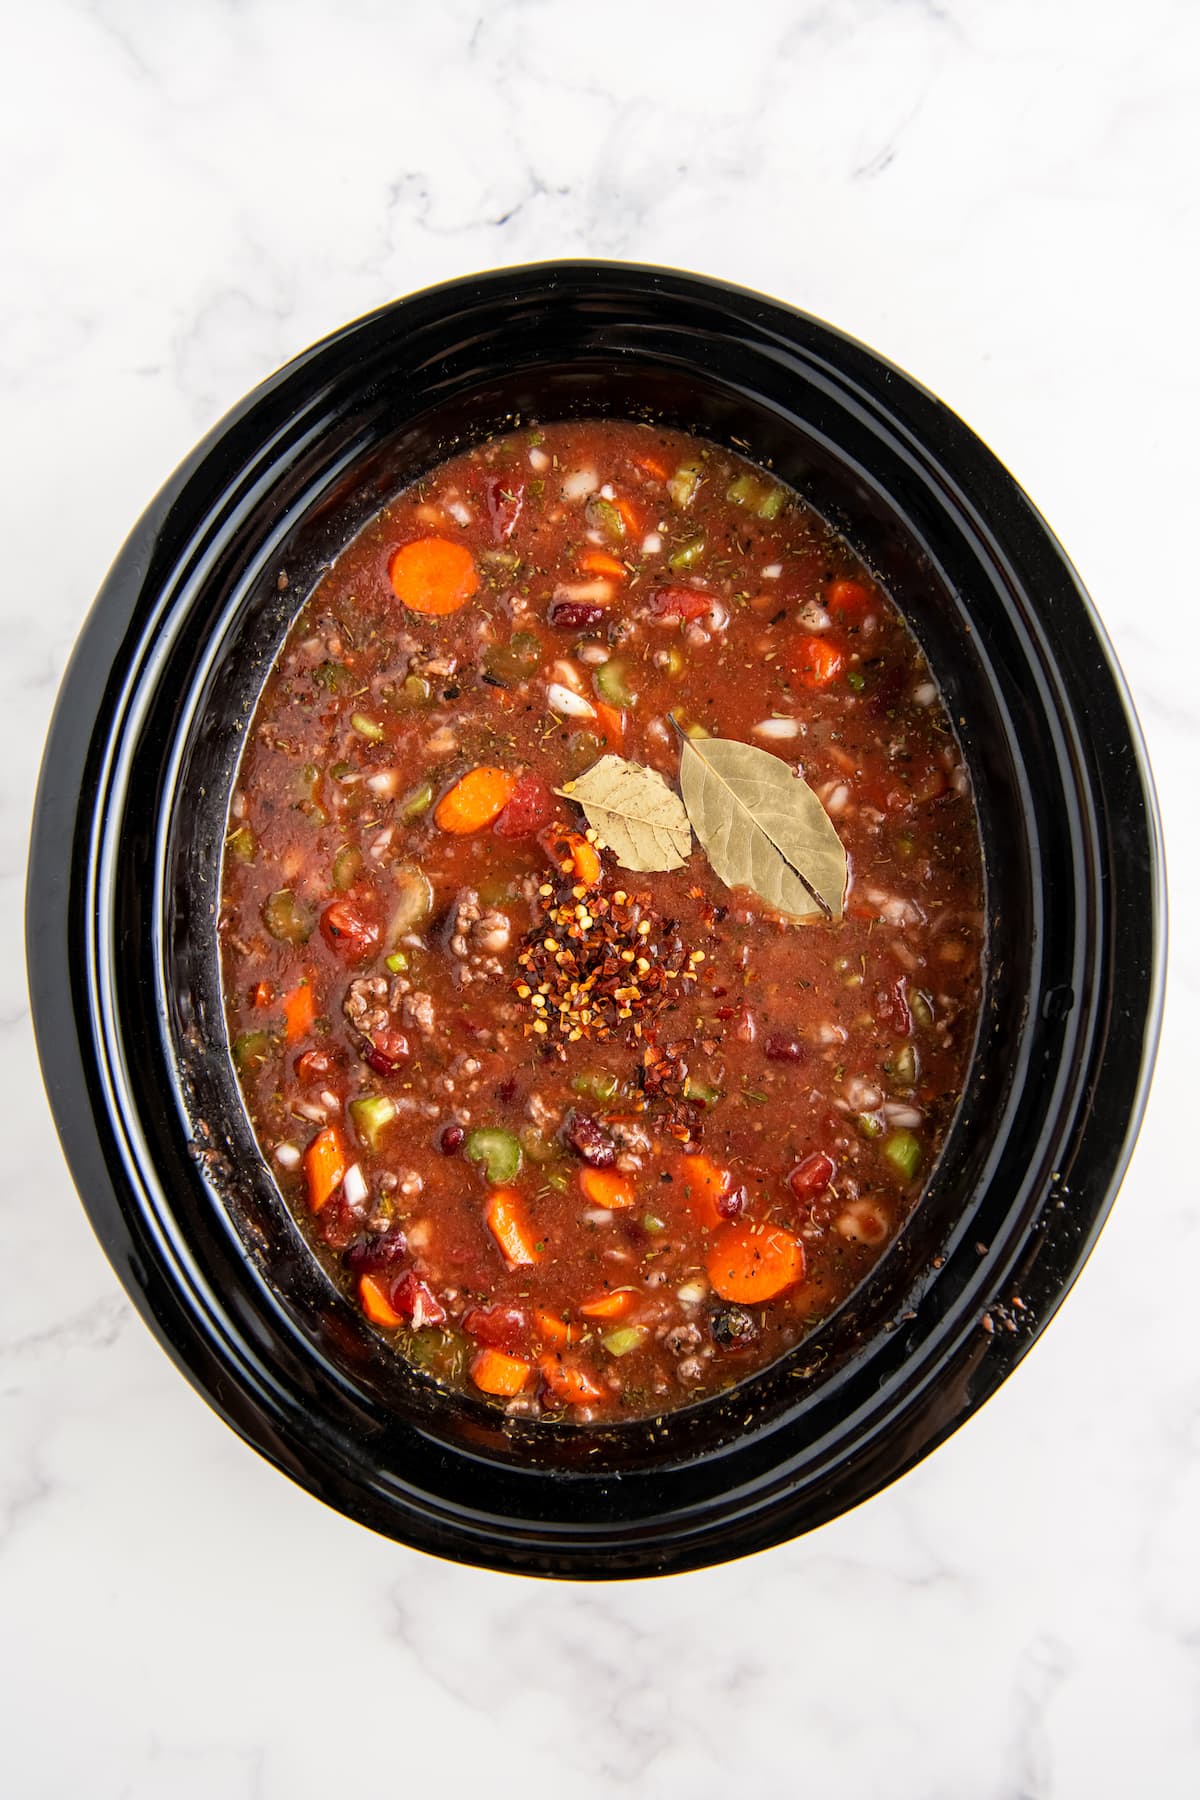 a rich tomato based broth with vegetables, beans, and bay leaf in a crockpot